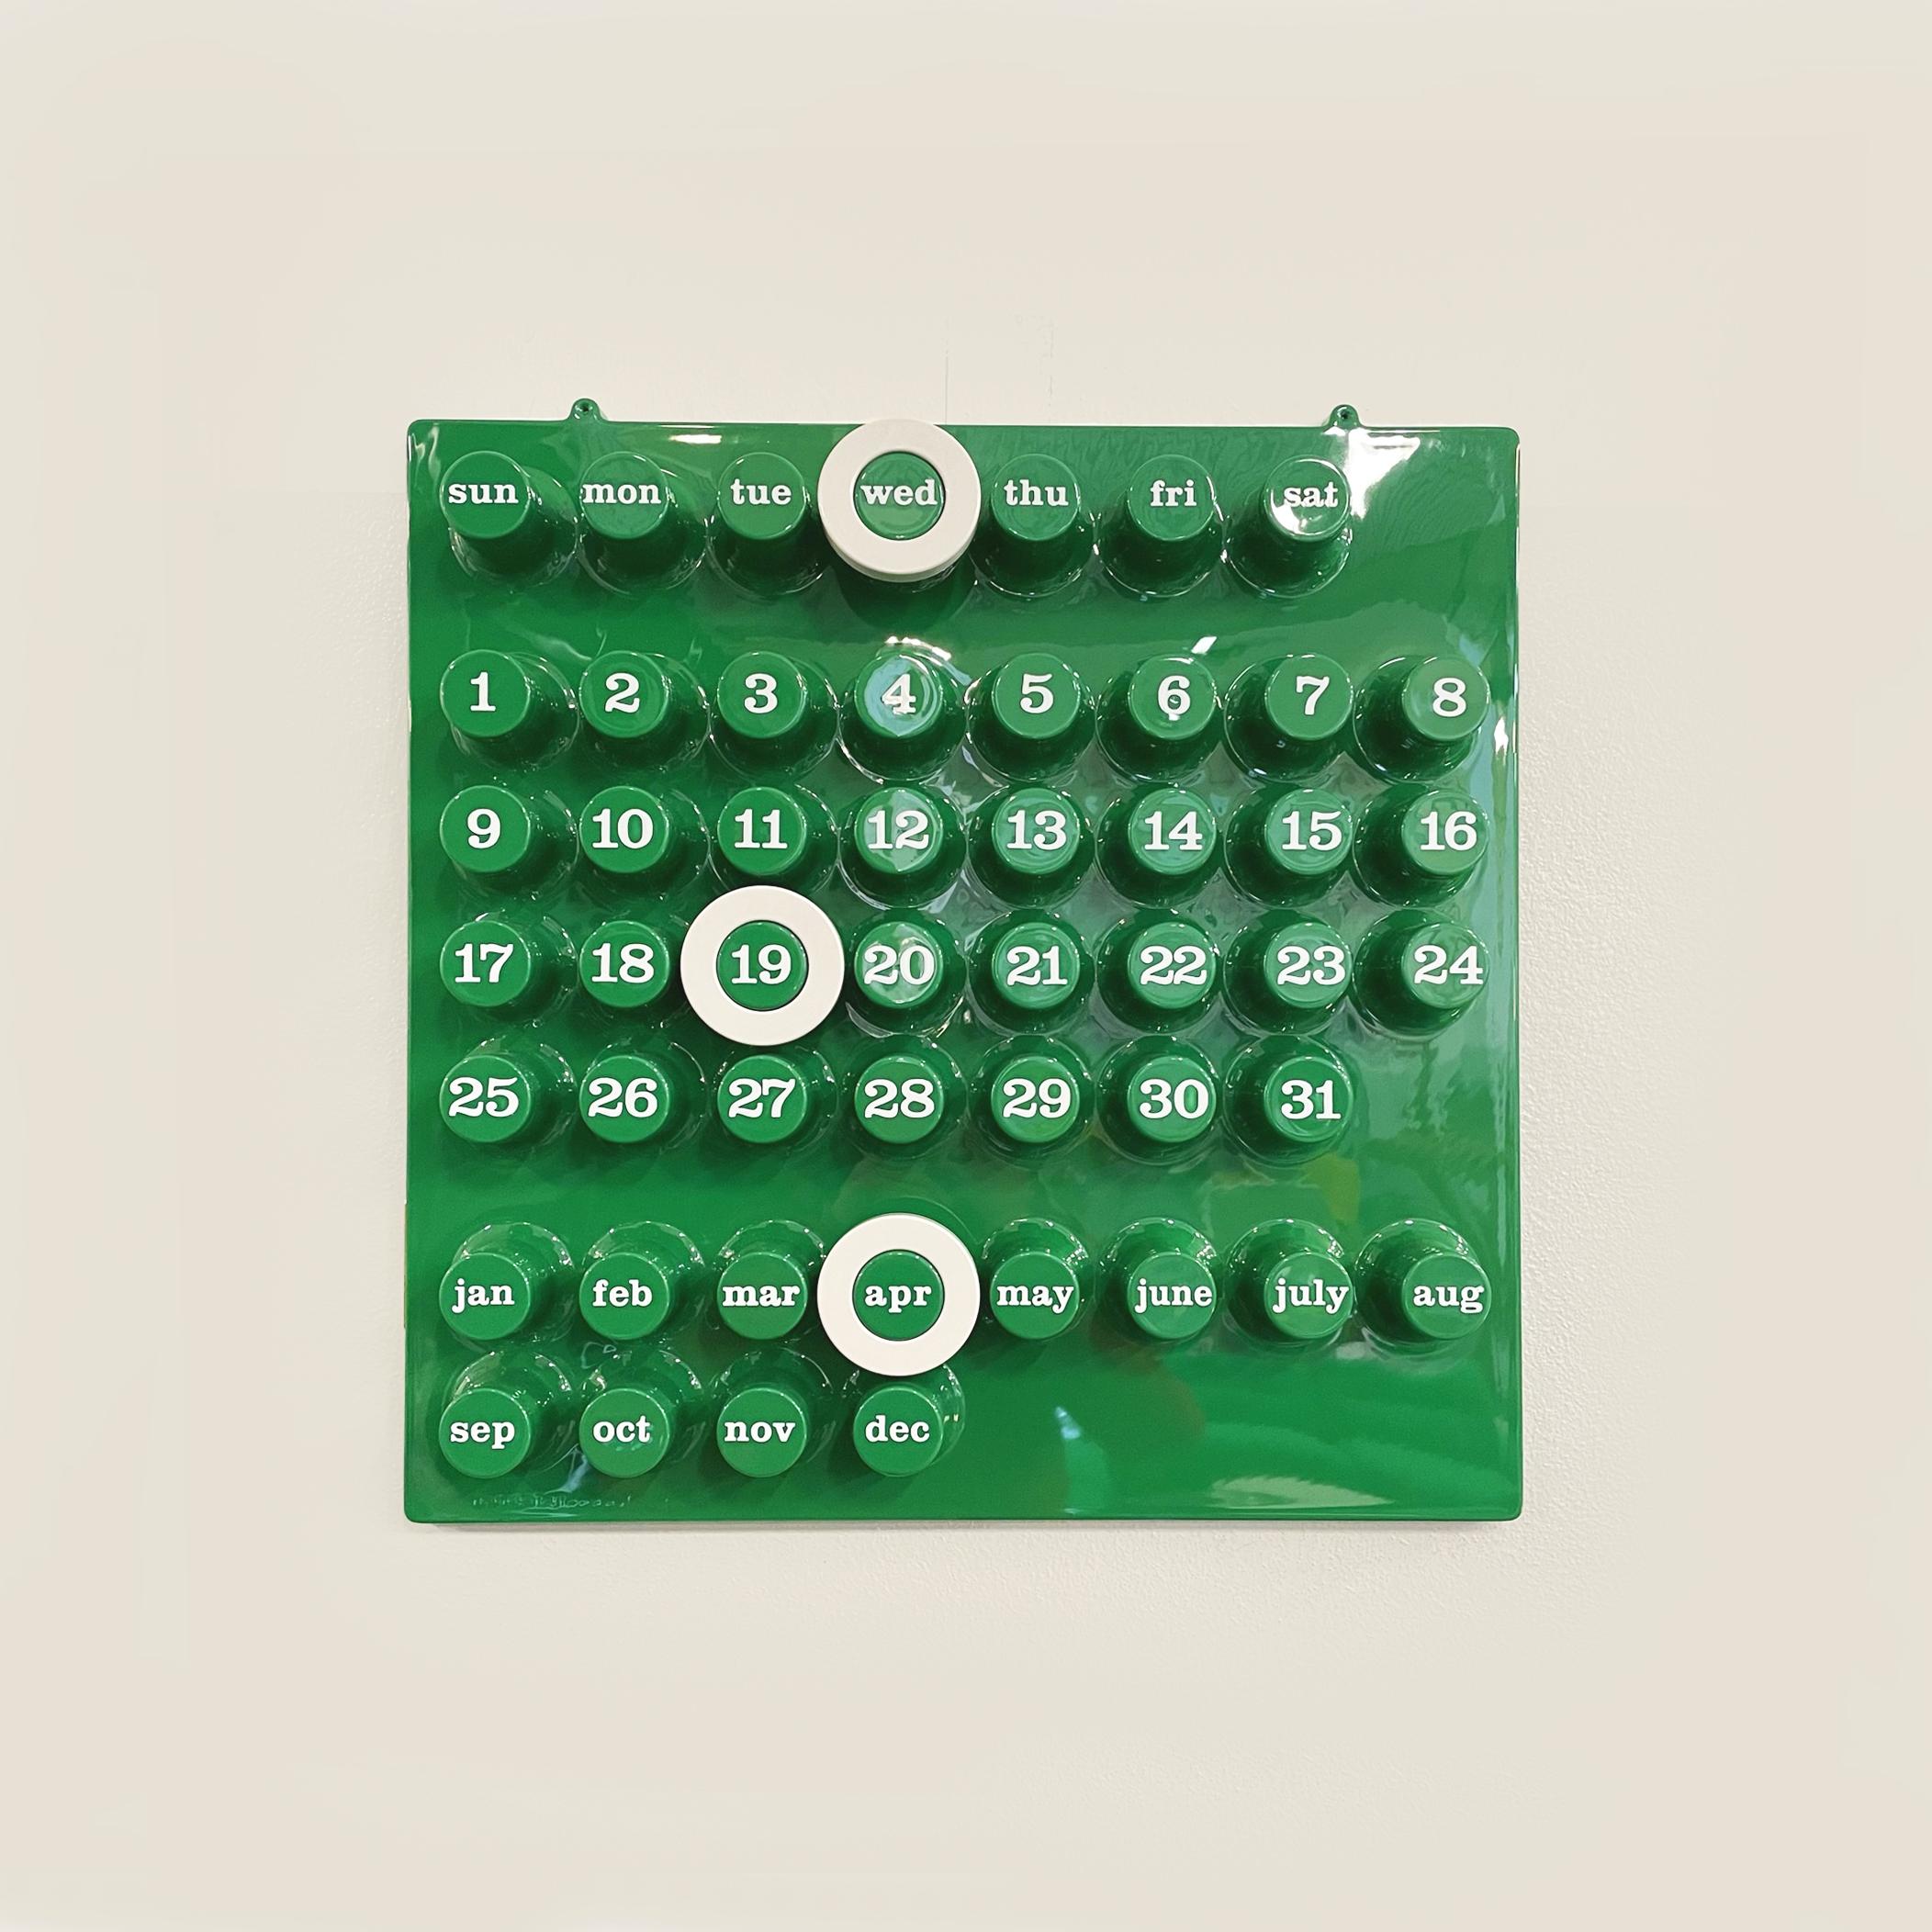 Italian postmodern Wall perpetual calendar by Giorgio Della Beffa for Ring A Date, 2000-2010s
Iconic and elegant wall perpetual calendar in green plastic. The calendar has several protruding cylinders: these correspond to the days of the week in